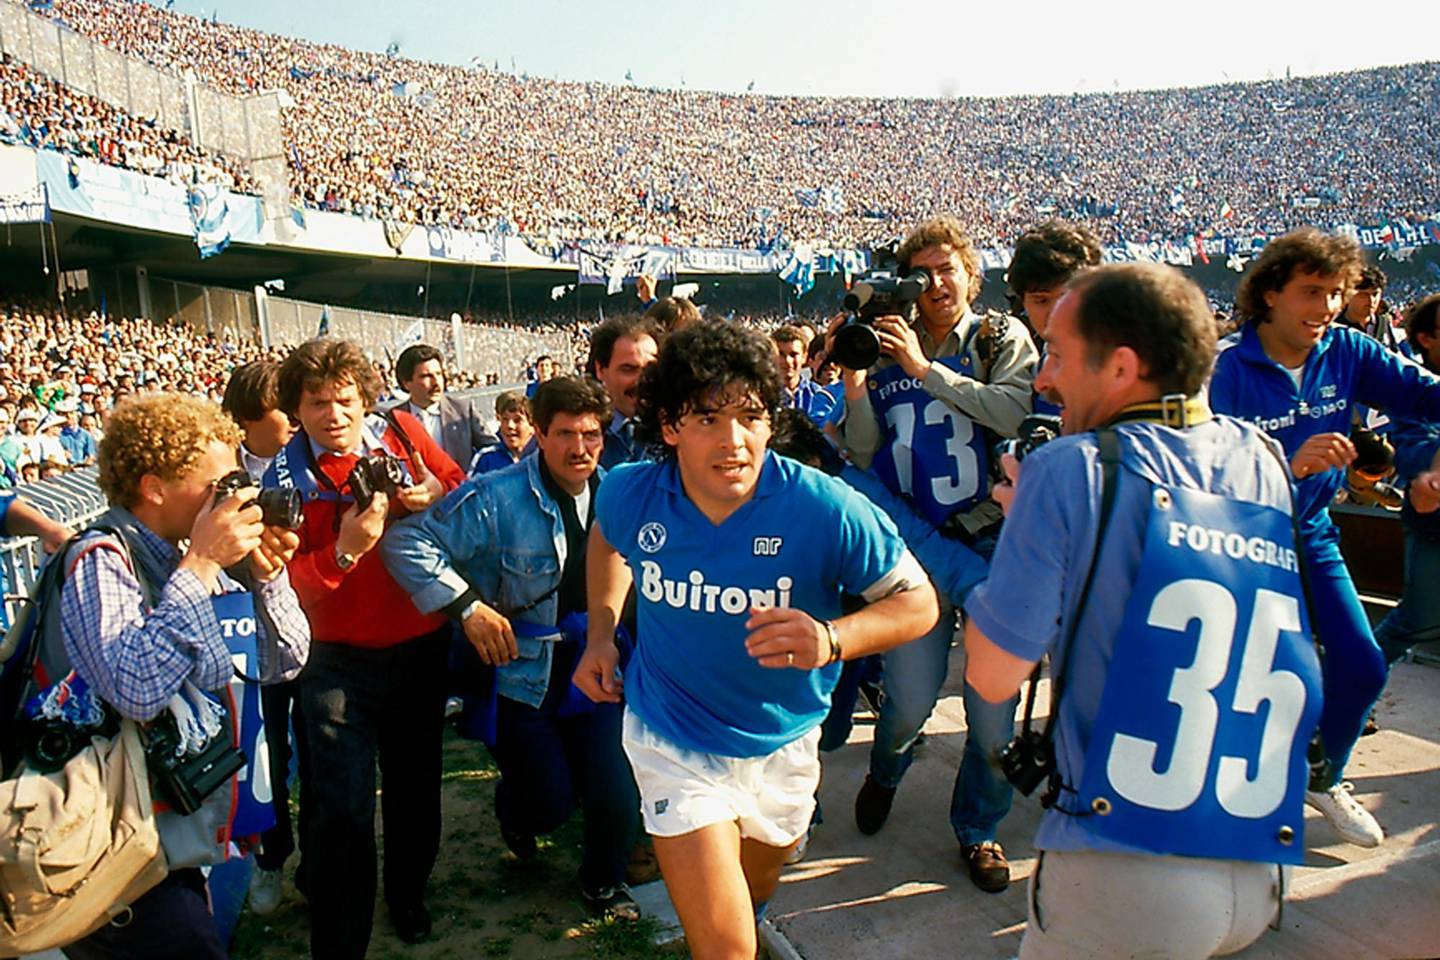 This image released by HBO shows soccer star Diego Maradona in a scene from "Maradona." Constructed from over 500 hours of footage, the documentary centers on the career of celebrated football player Maradona, who played for S.S.C. Napoli in the 1980s. (HBO via AP)